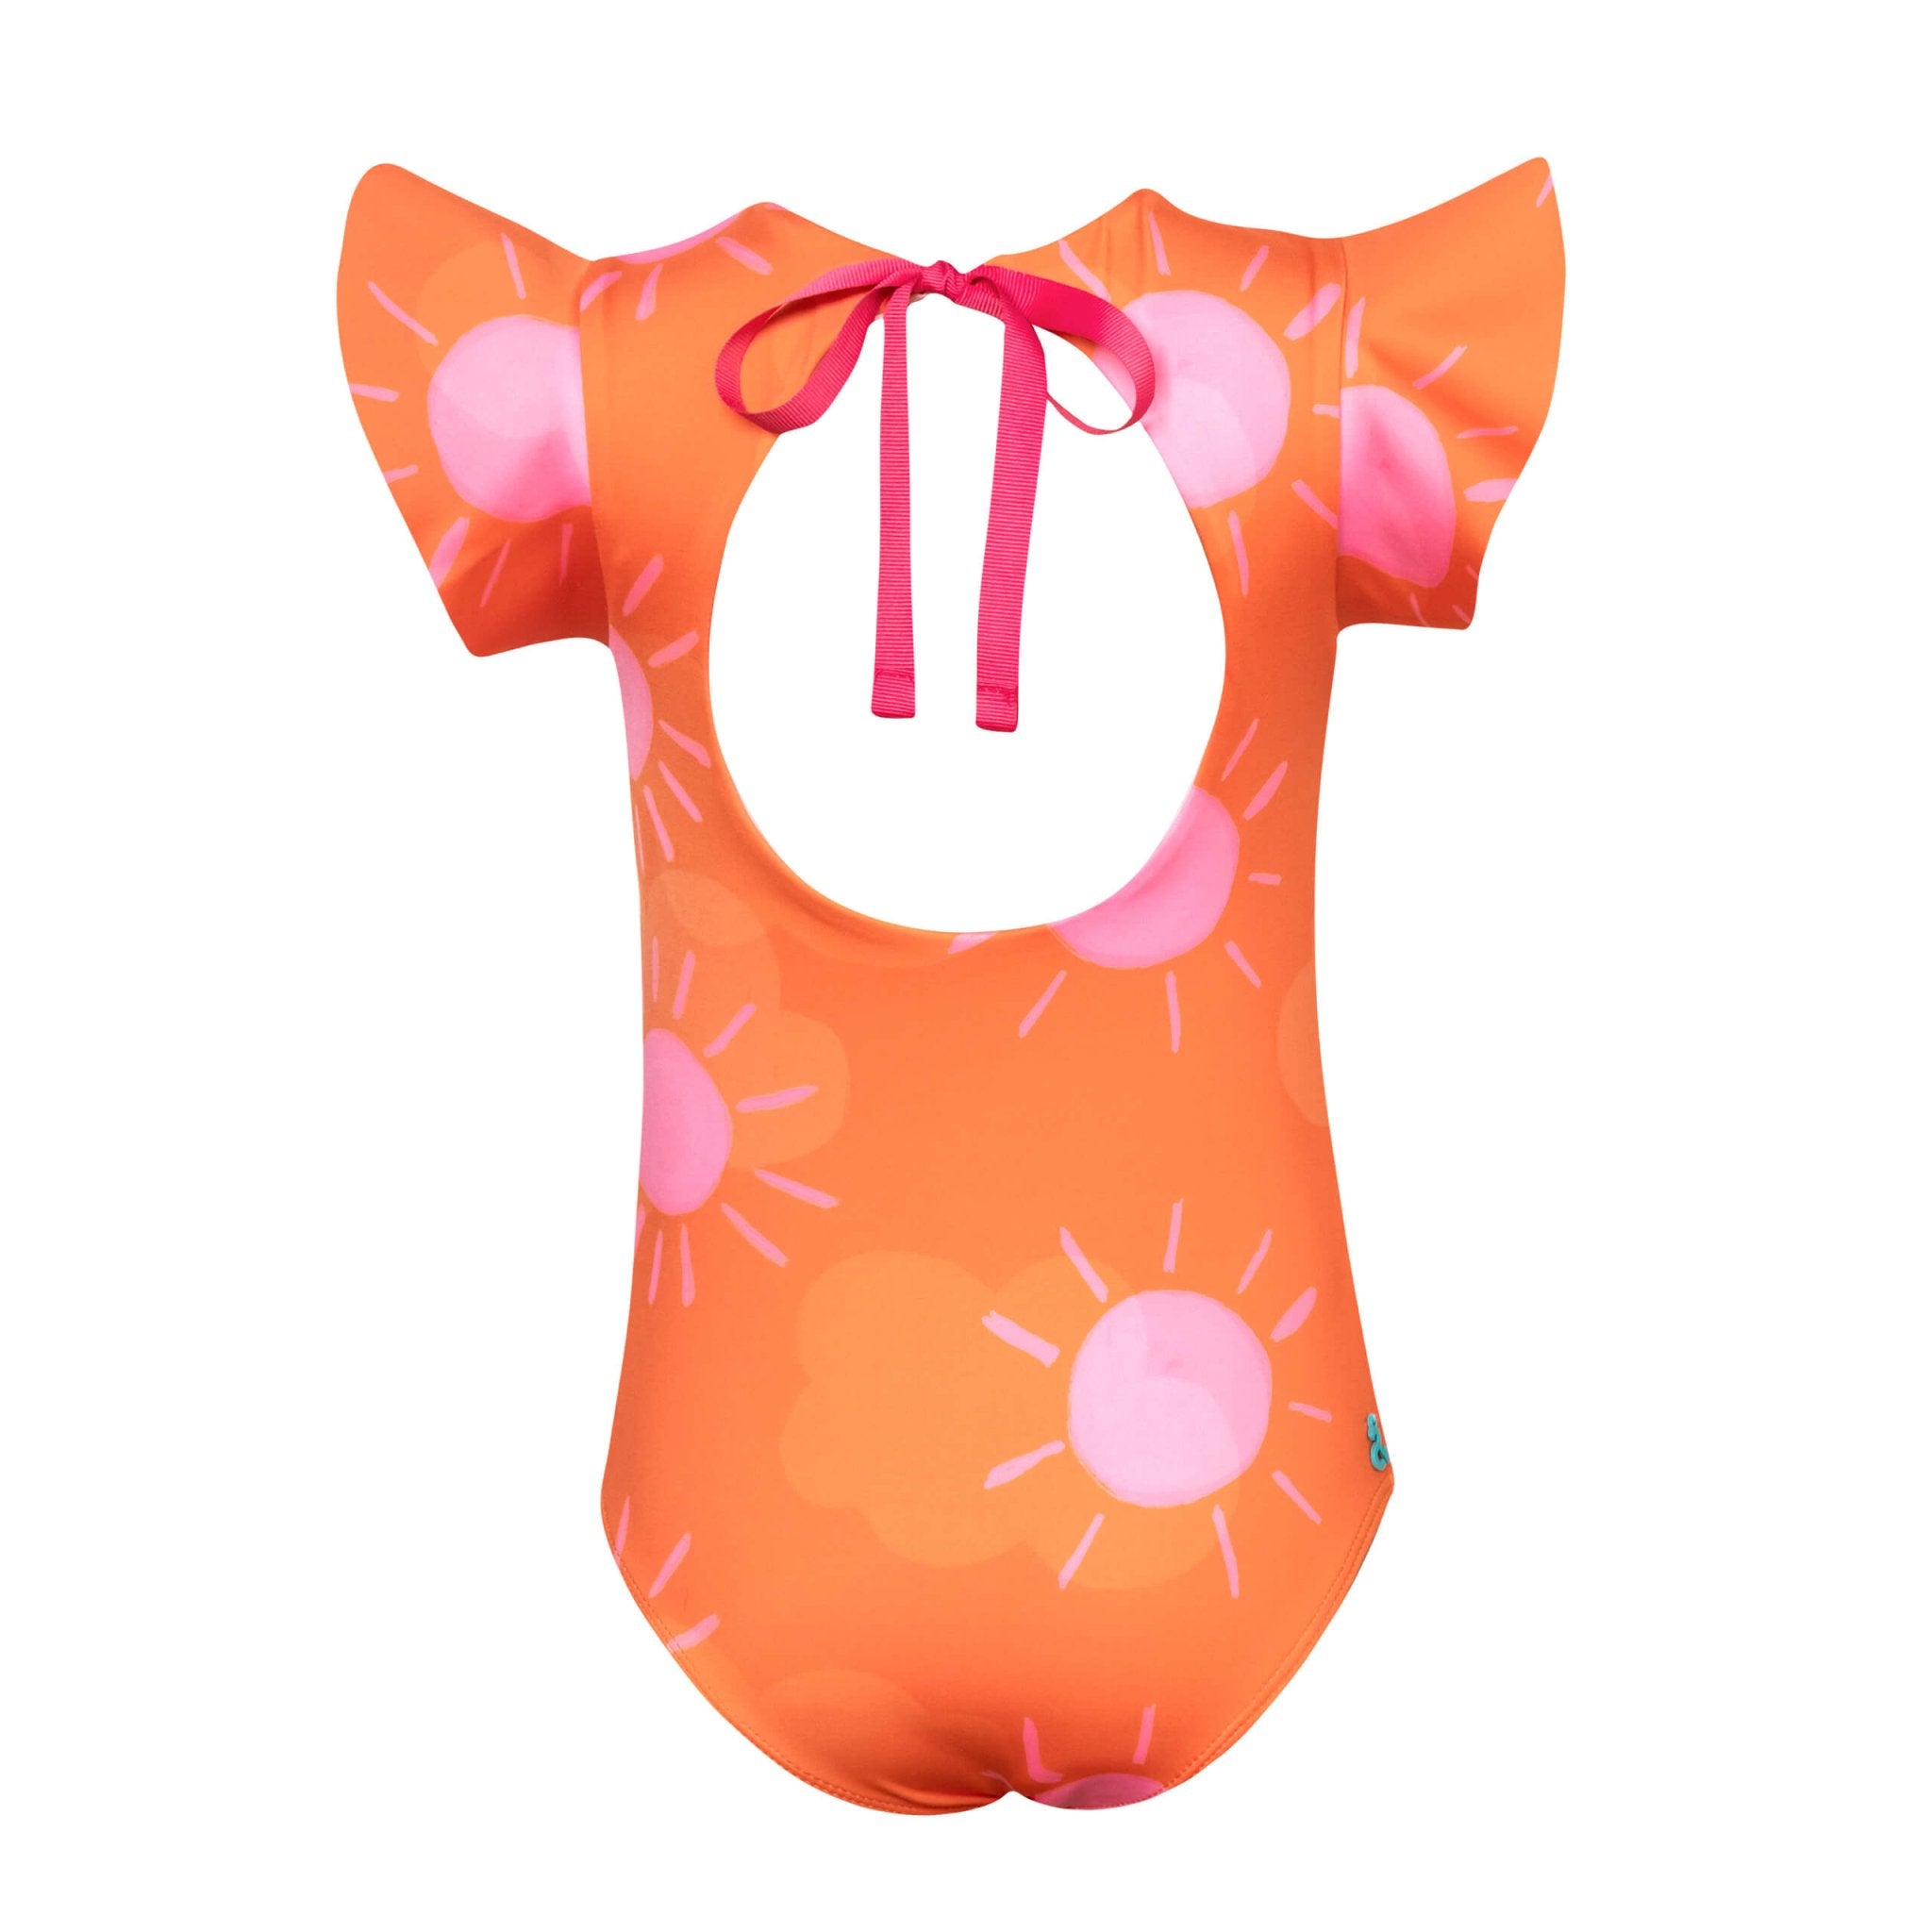 The back of the sun-themed orange one piece swimsuit for girls. It has a circle cutout on the back with a little adjustable ribbon bow and wavey sleeve. The swimsuit is over a white background.